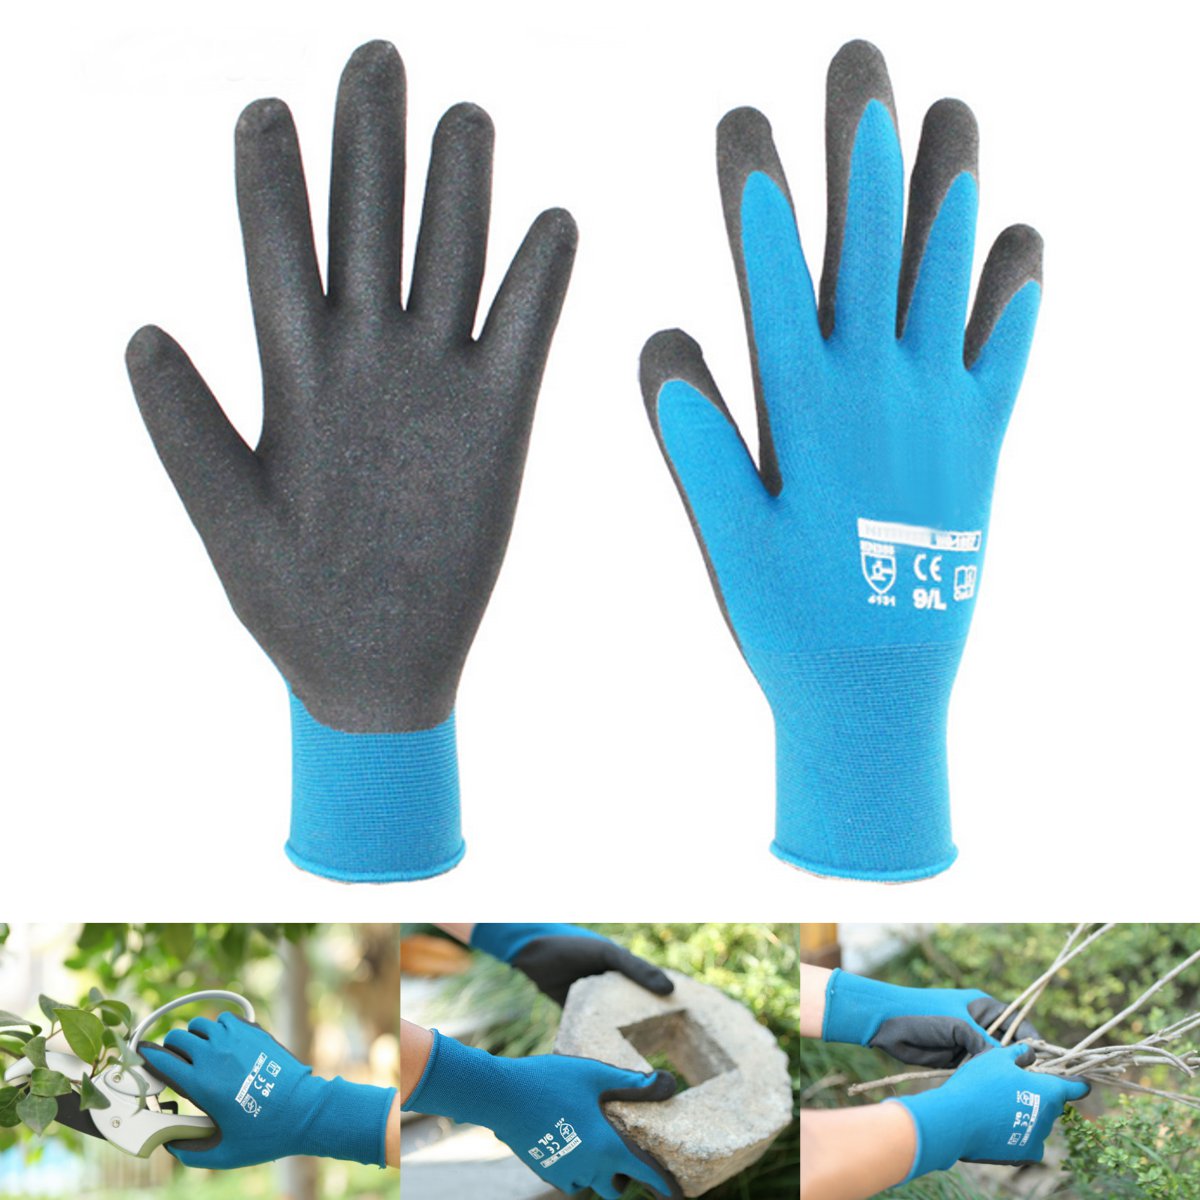 

Garden Housework Gloves Waterproof Durable Nylon with Nitrile Sandy Coated Protection Safty Glove